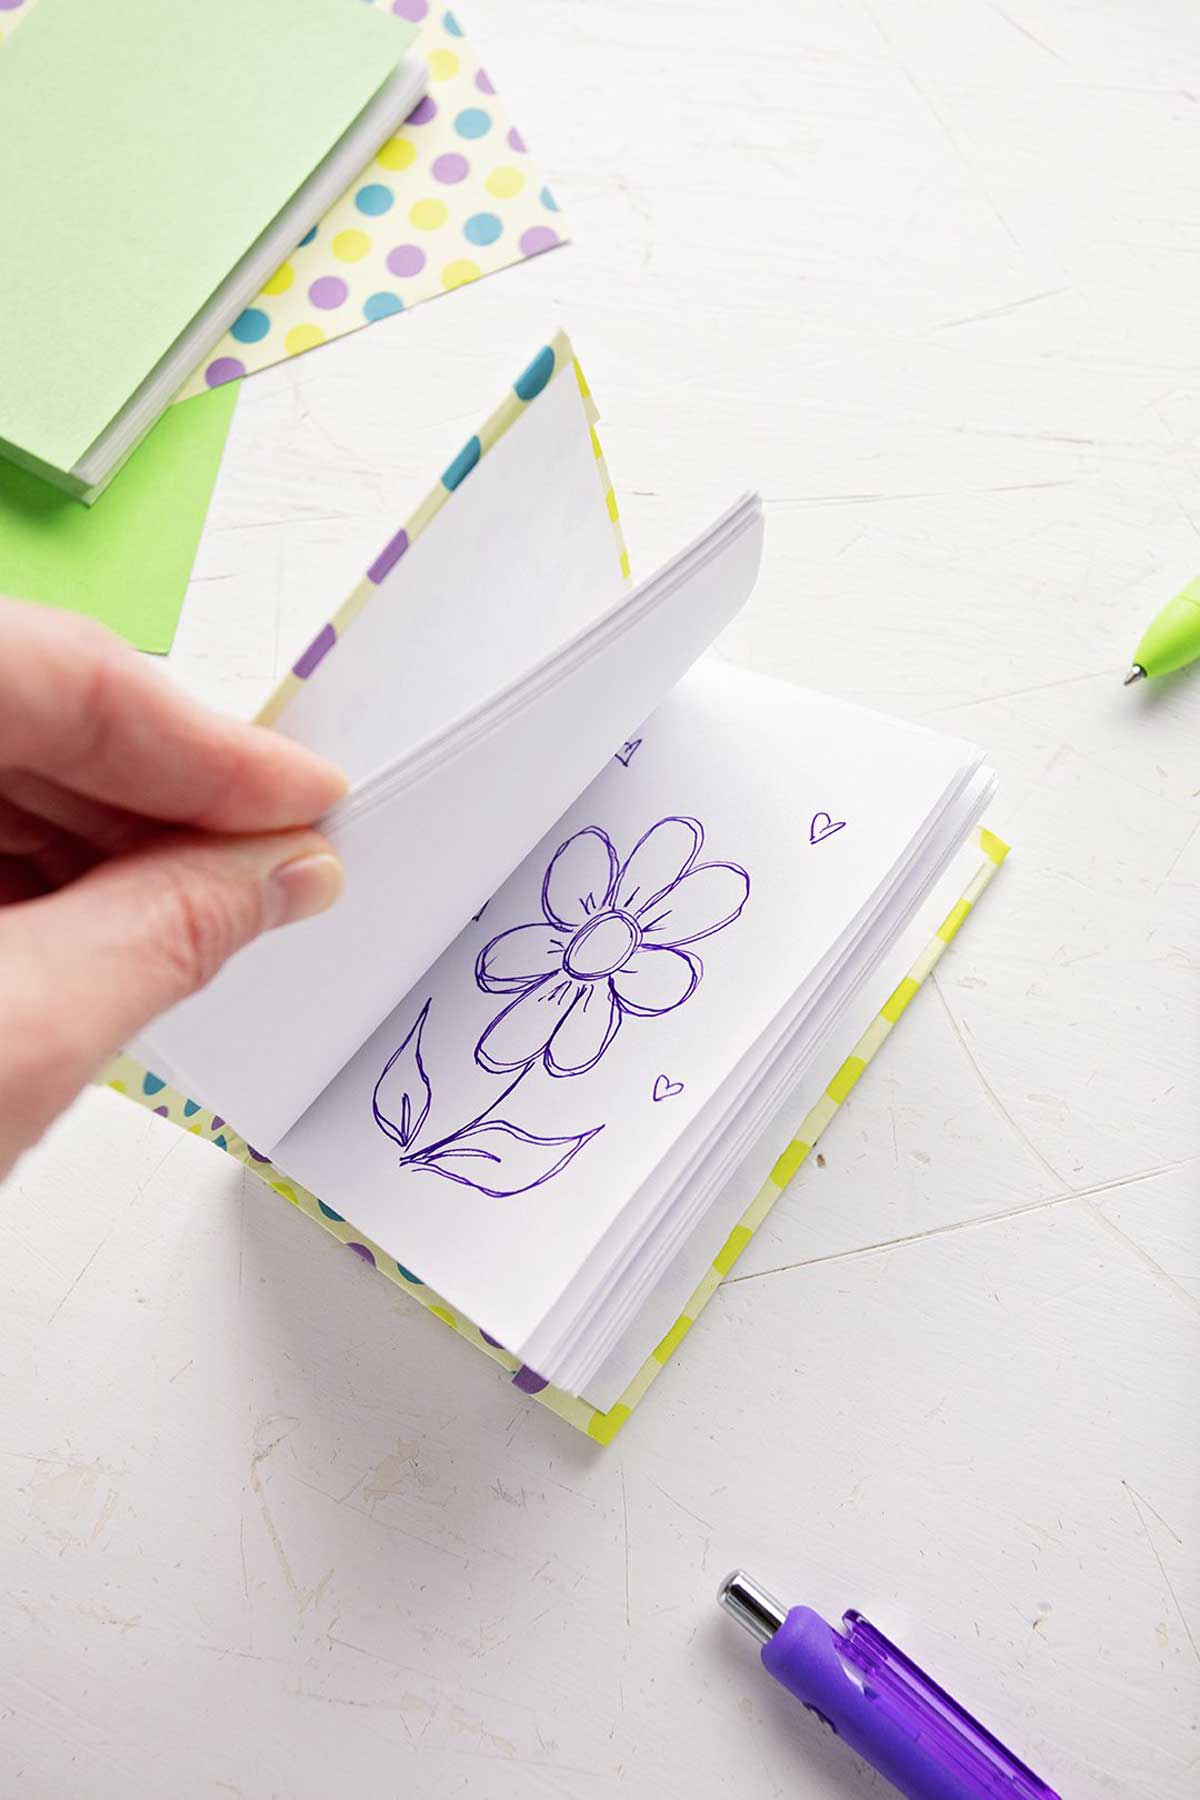 A DIY miniature journal with a flower picture drawn on one of the pages, scrapbook paper and pens in the background.